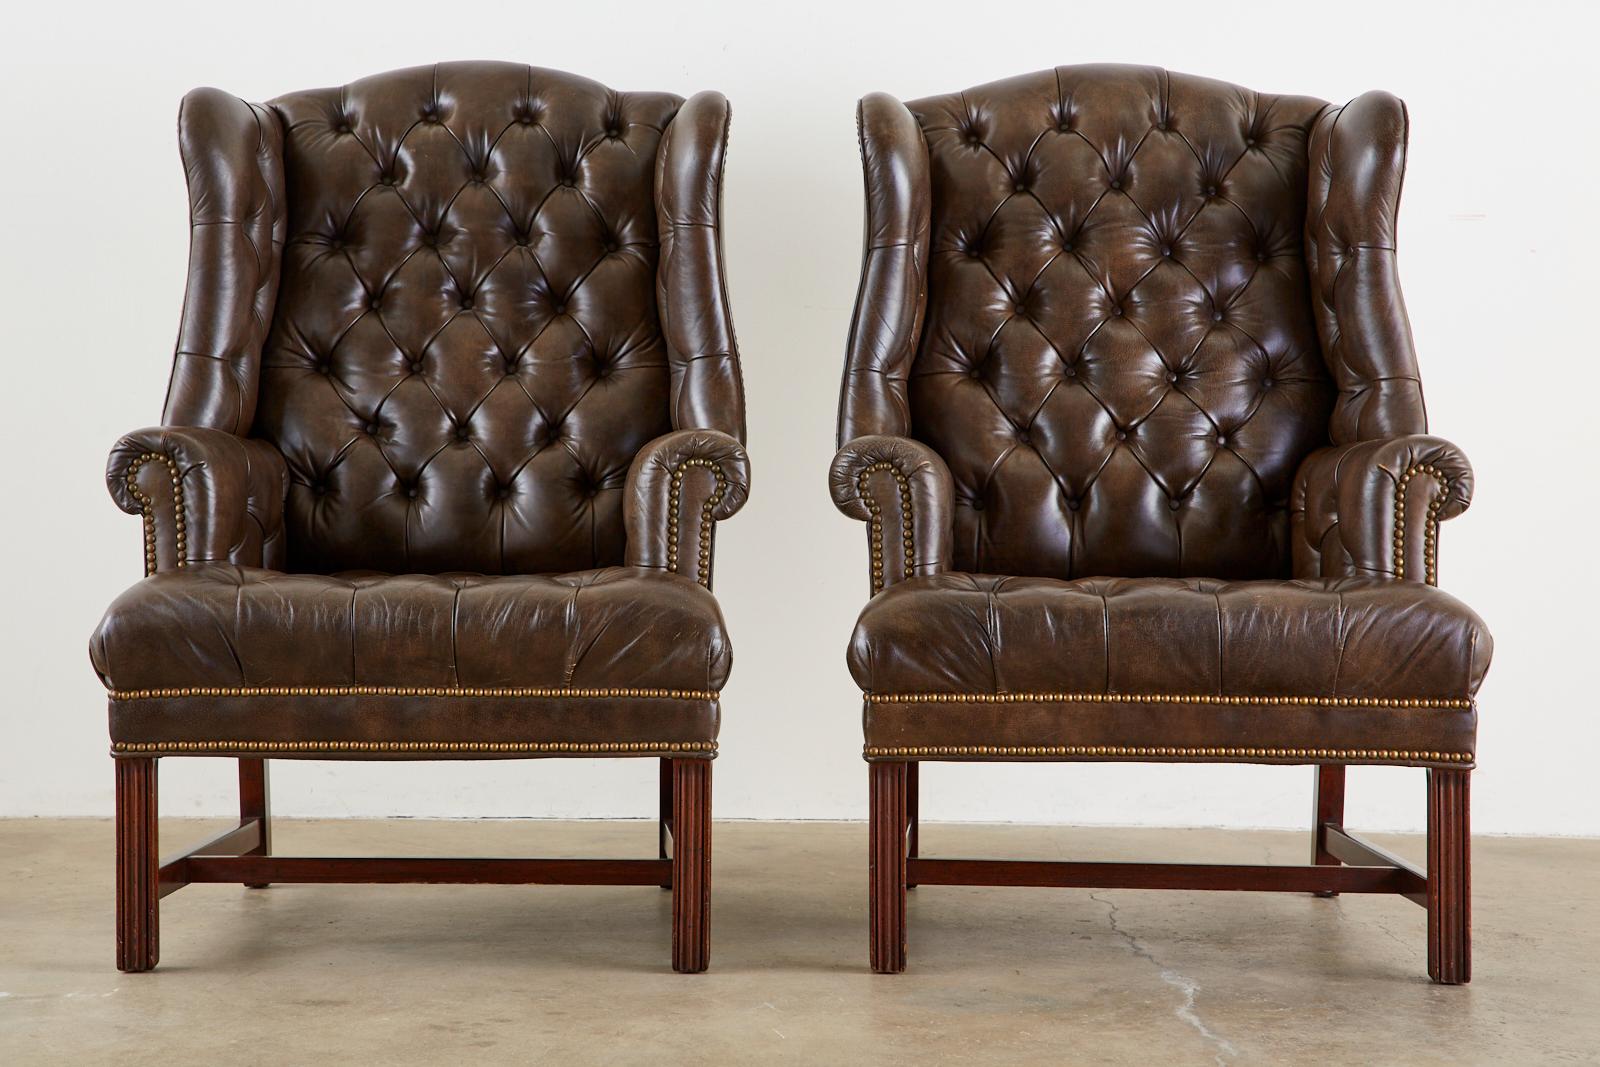 Stately pair of English Georgian style wing back armchairs with matching ottoman by Schafer Brothers. Featuring mahogany frames covered with a marbleized or textured finish on the fine leather. Tufted seat, back, wings, and ottoman with decorative